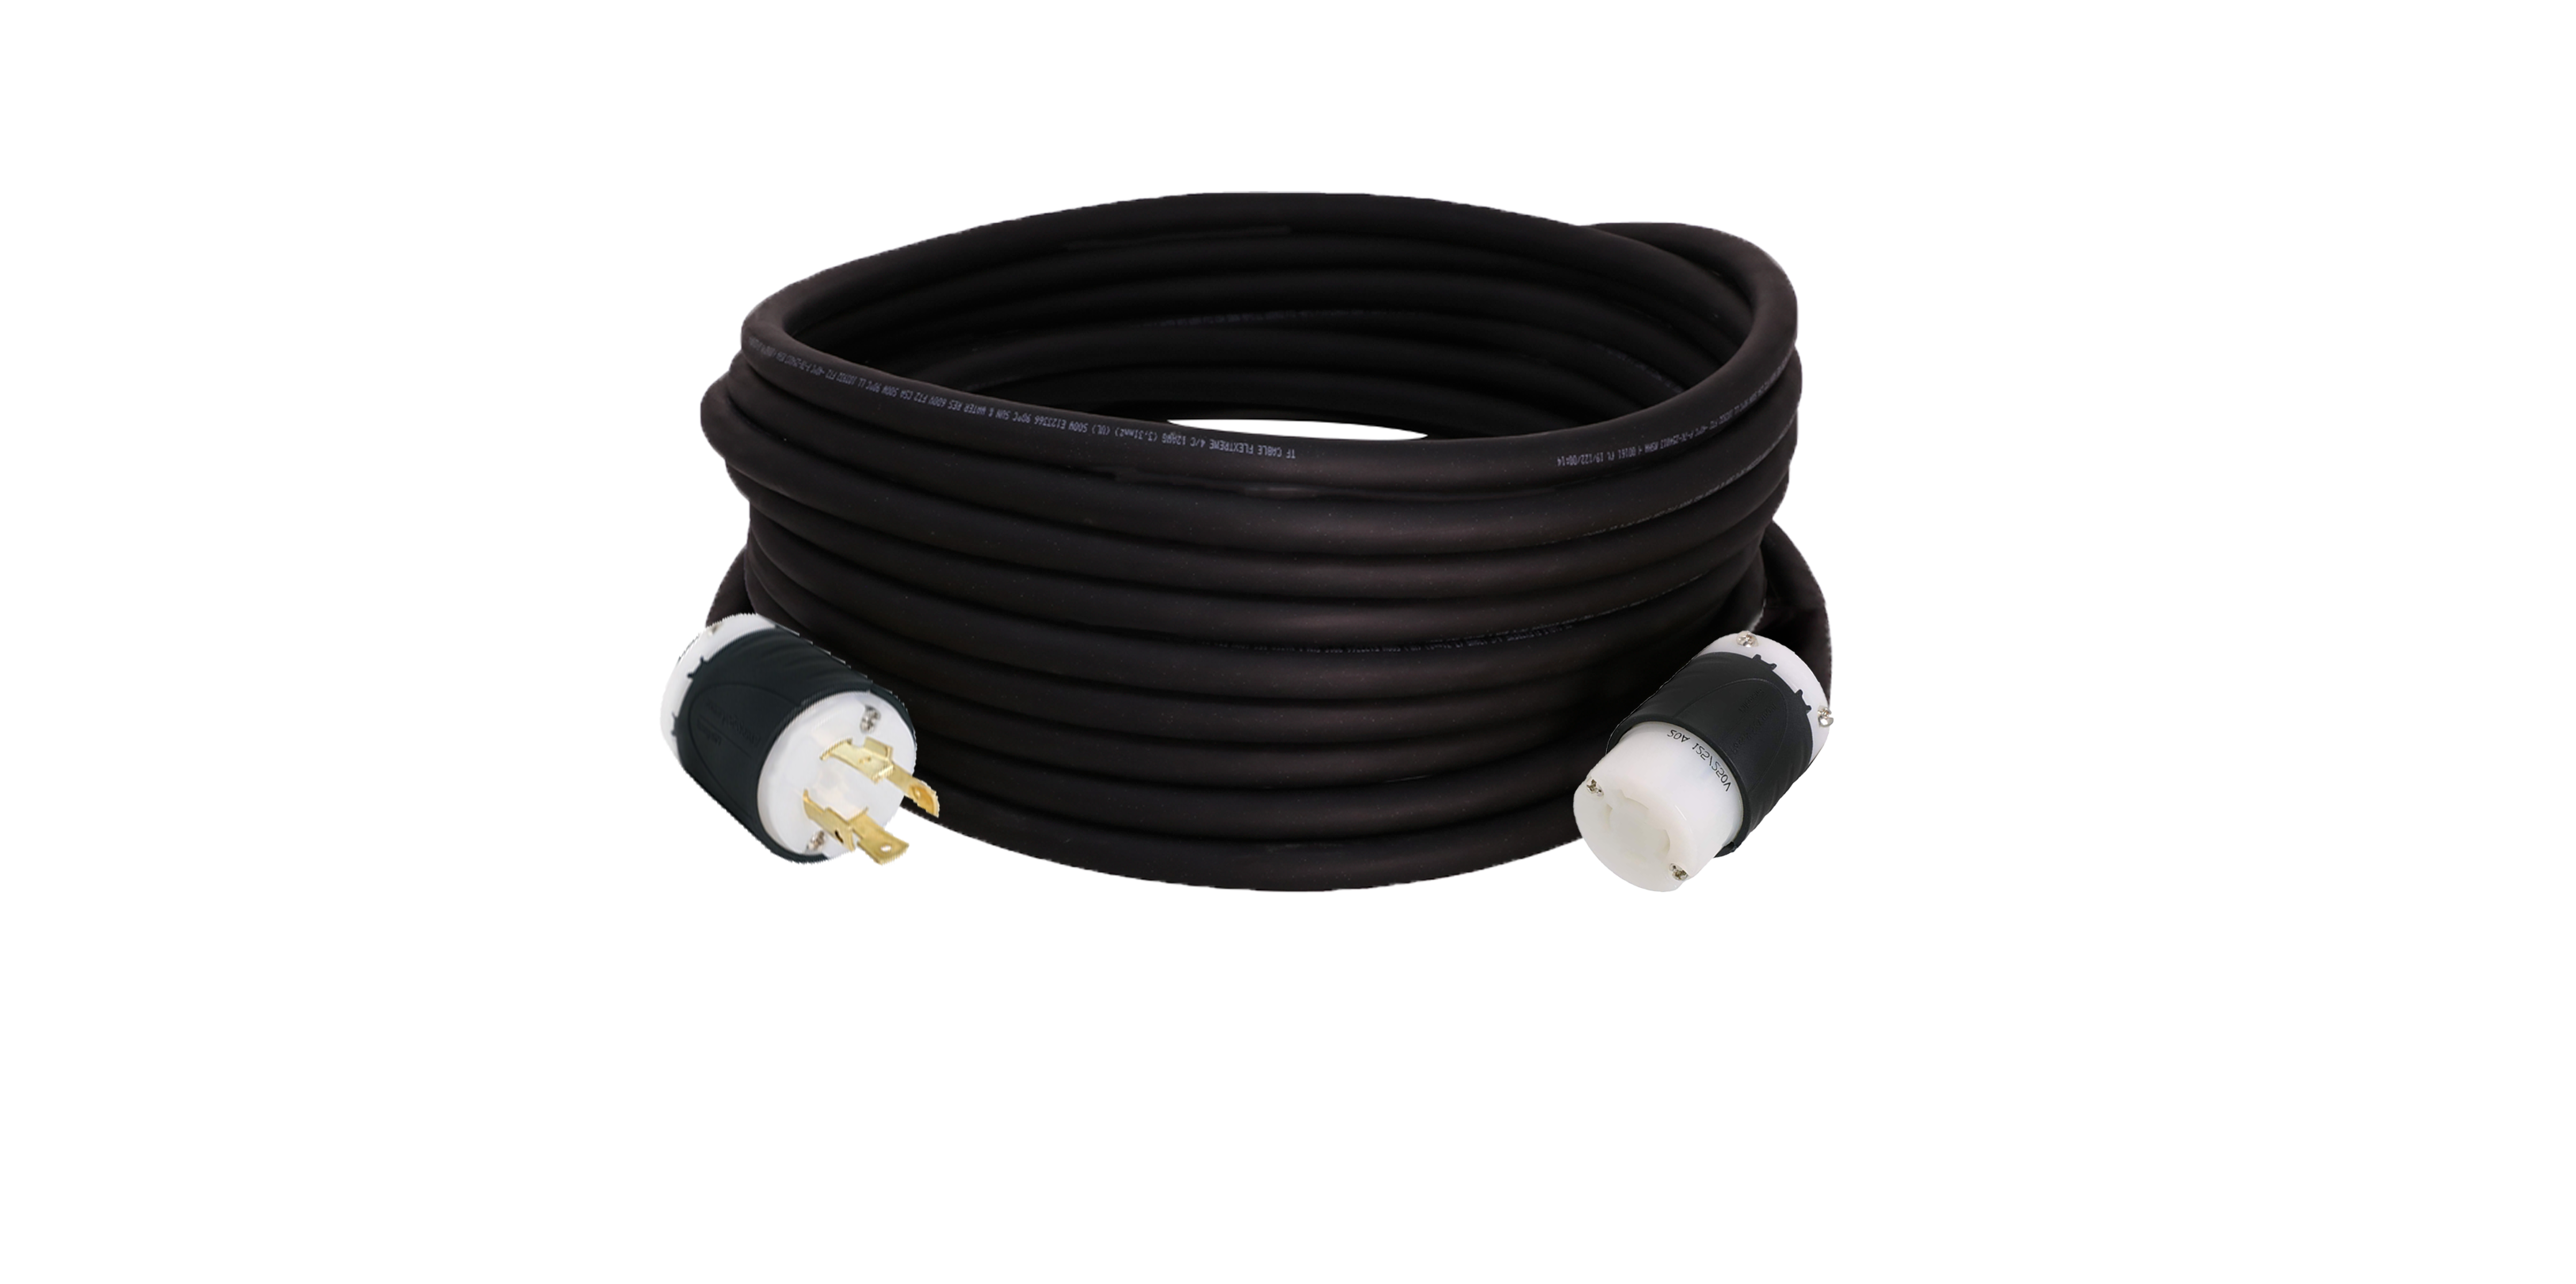 c14 to c13 power cable